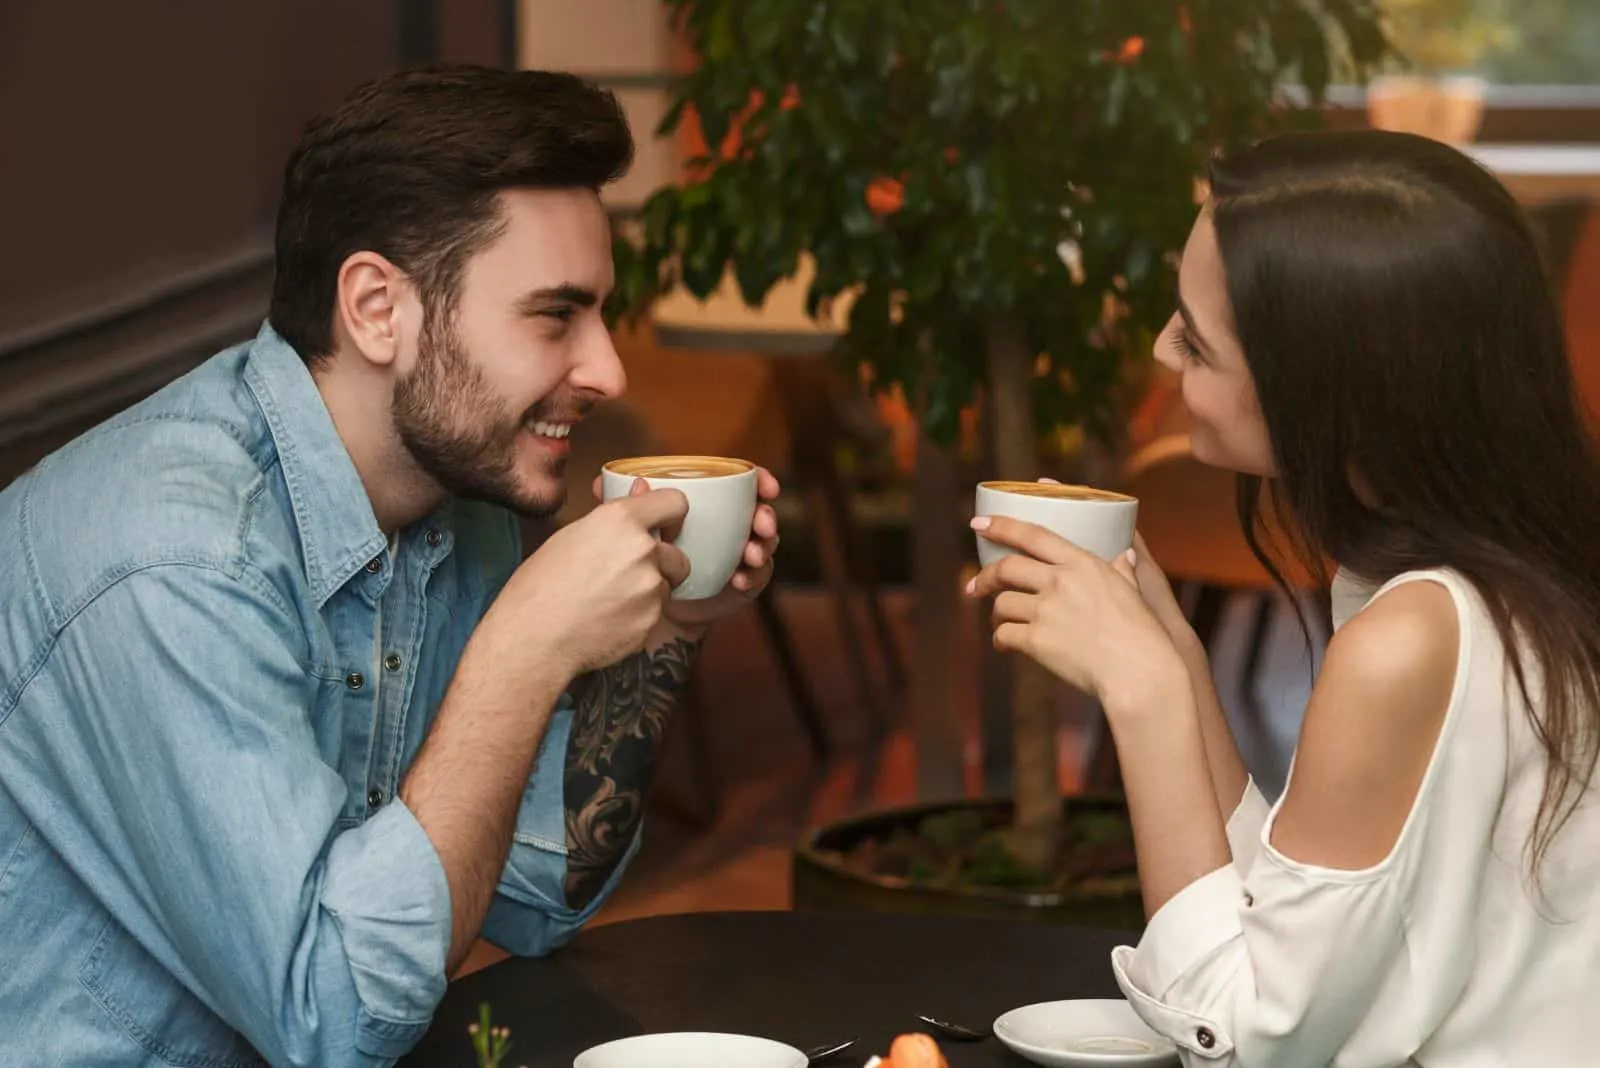 smiling man and woman enjoy talking over coffee